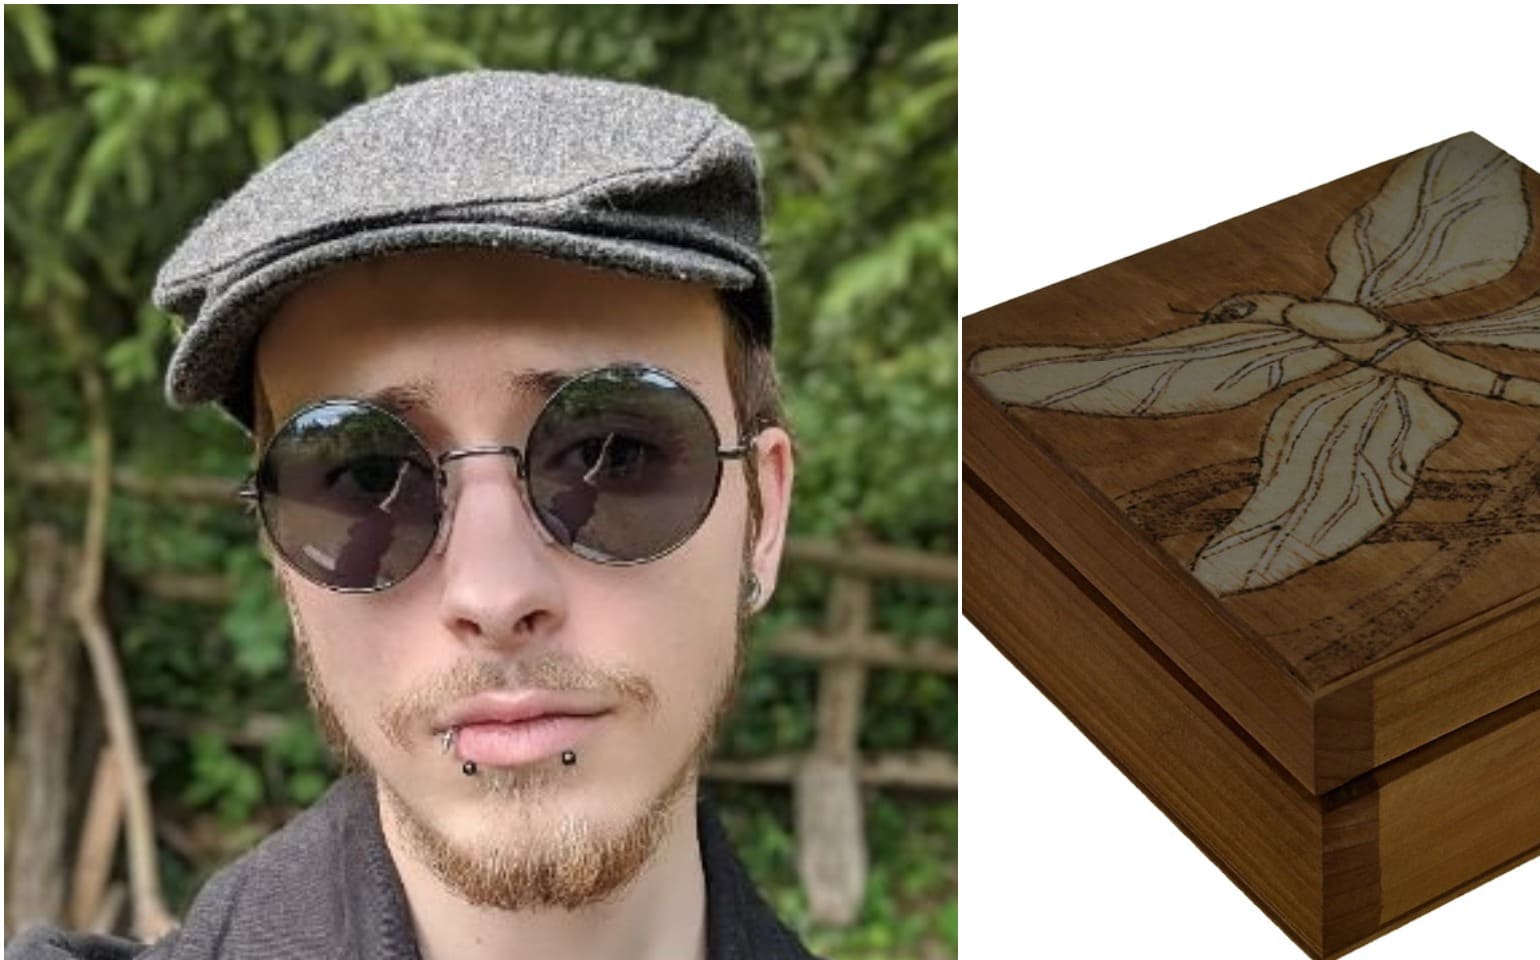 Dennis Bednarz and a sample image of the box that was stolen.